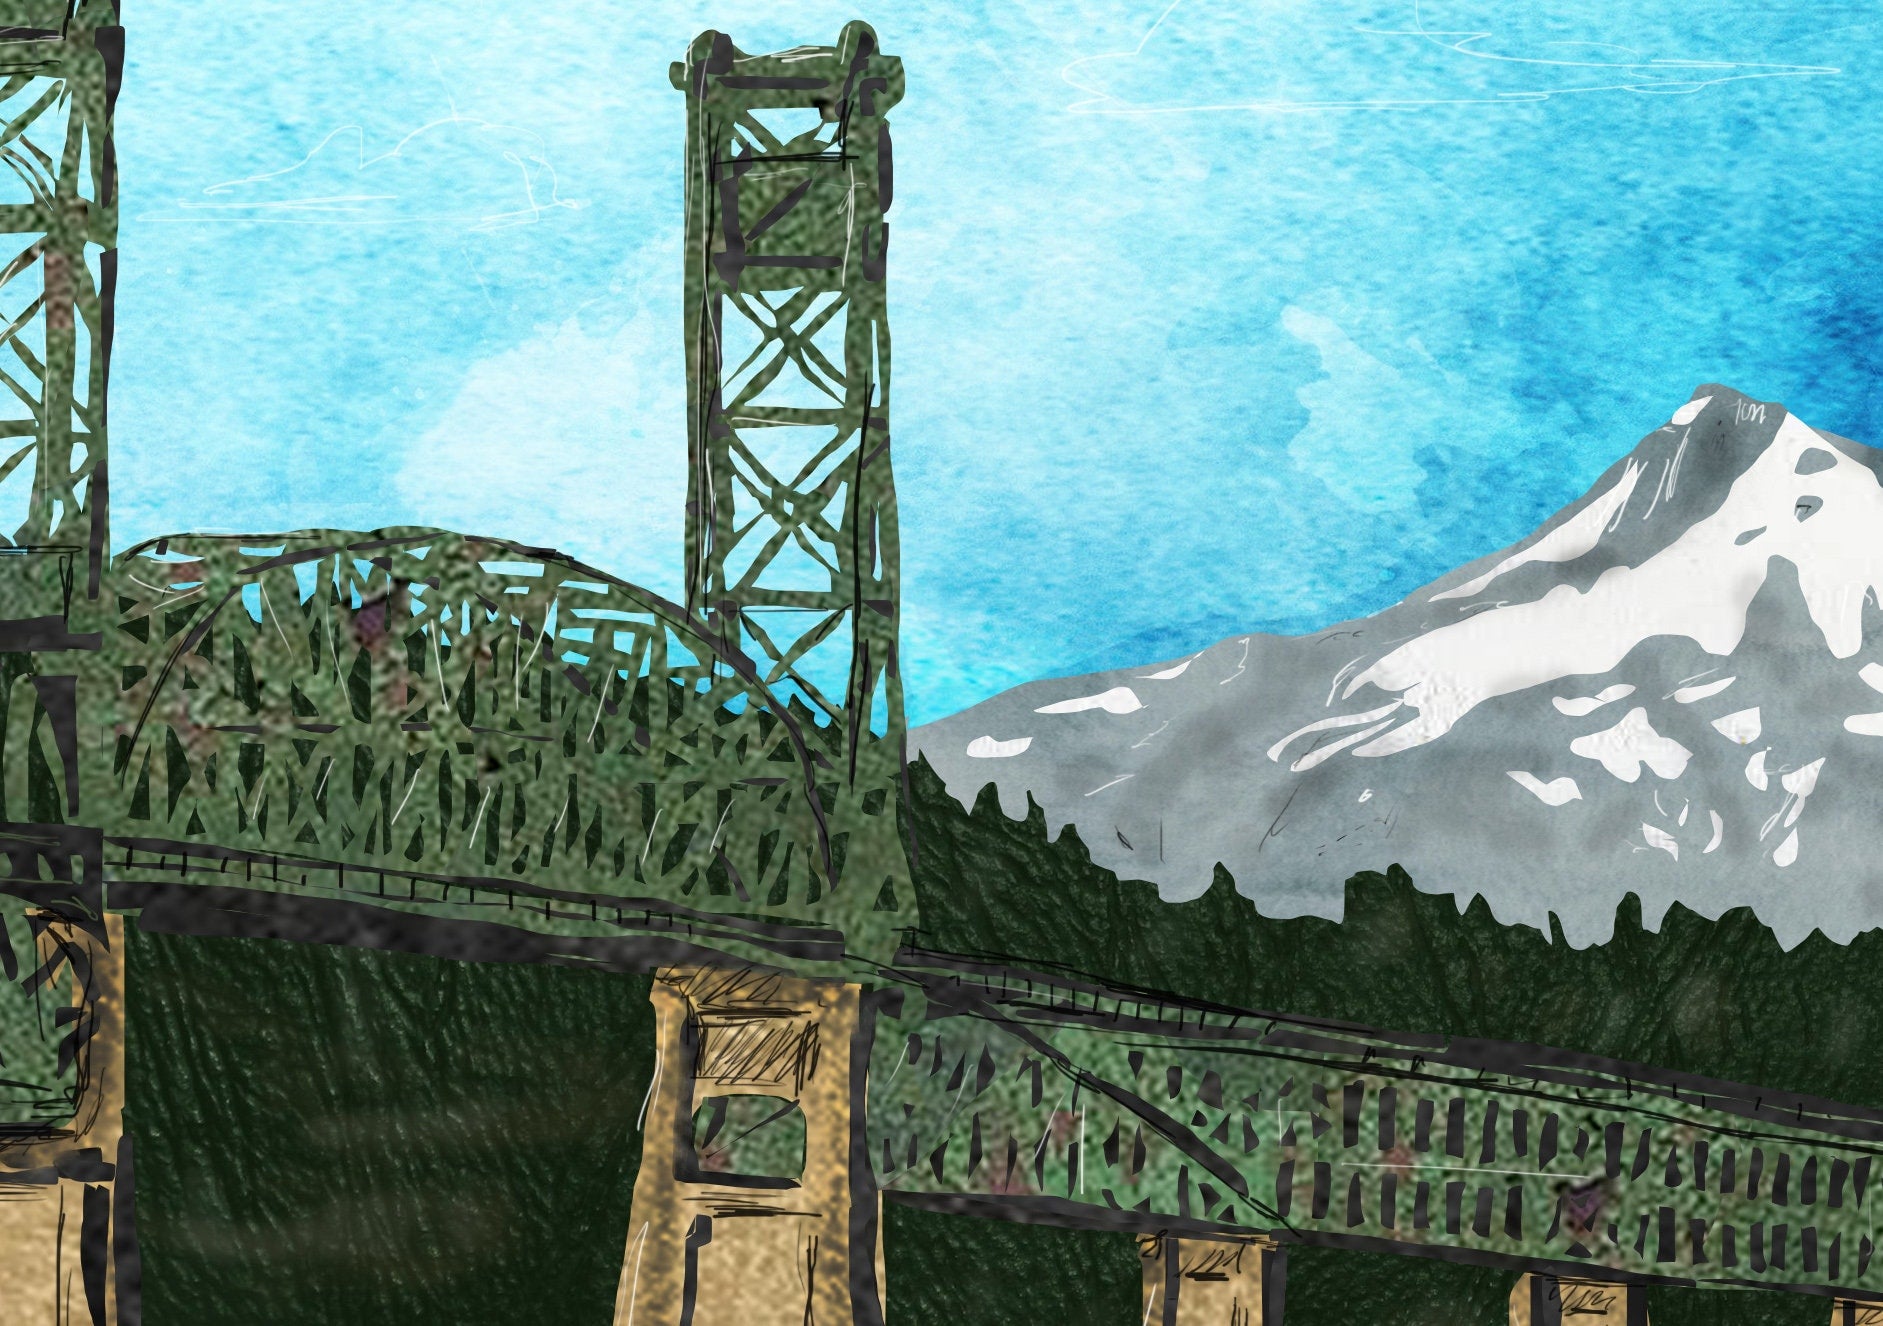 Greeting Card of mixed media collage of the Hood River Bridge between Oregon and Washington, over Columbia River - Blank Inside